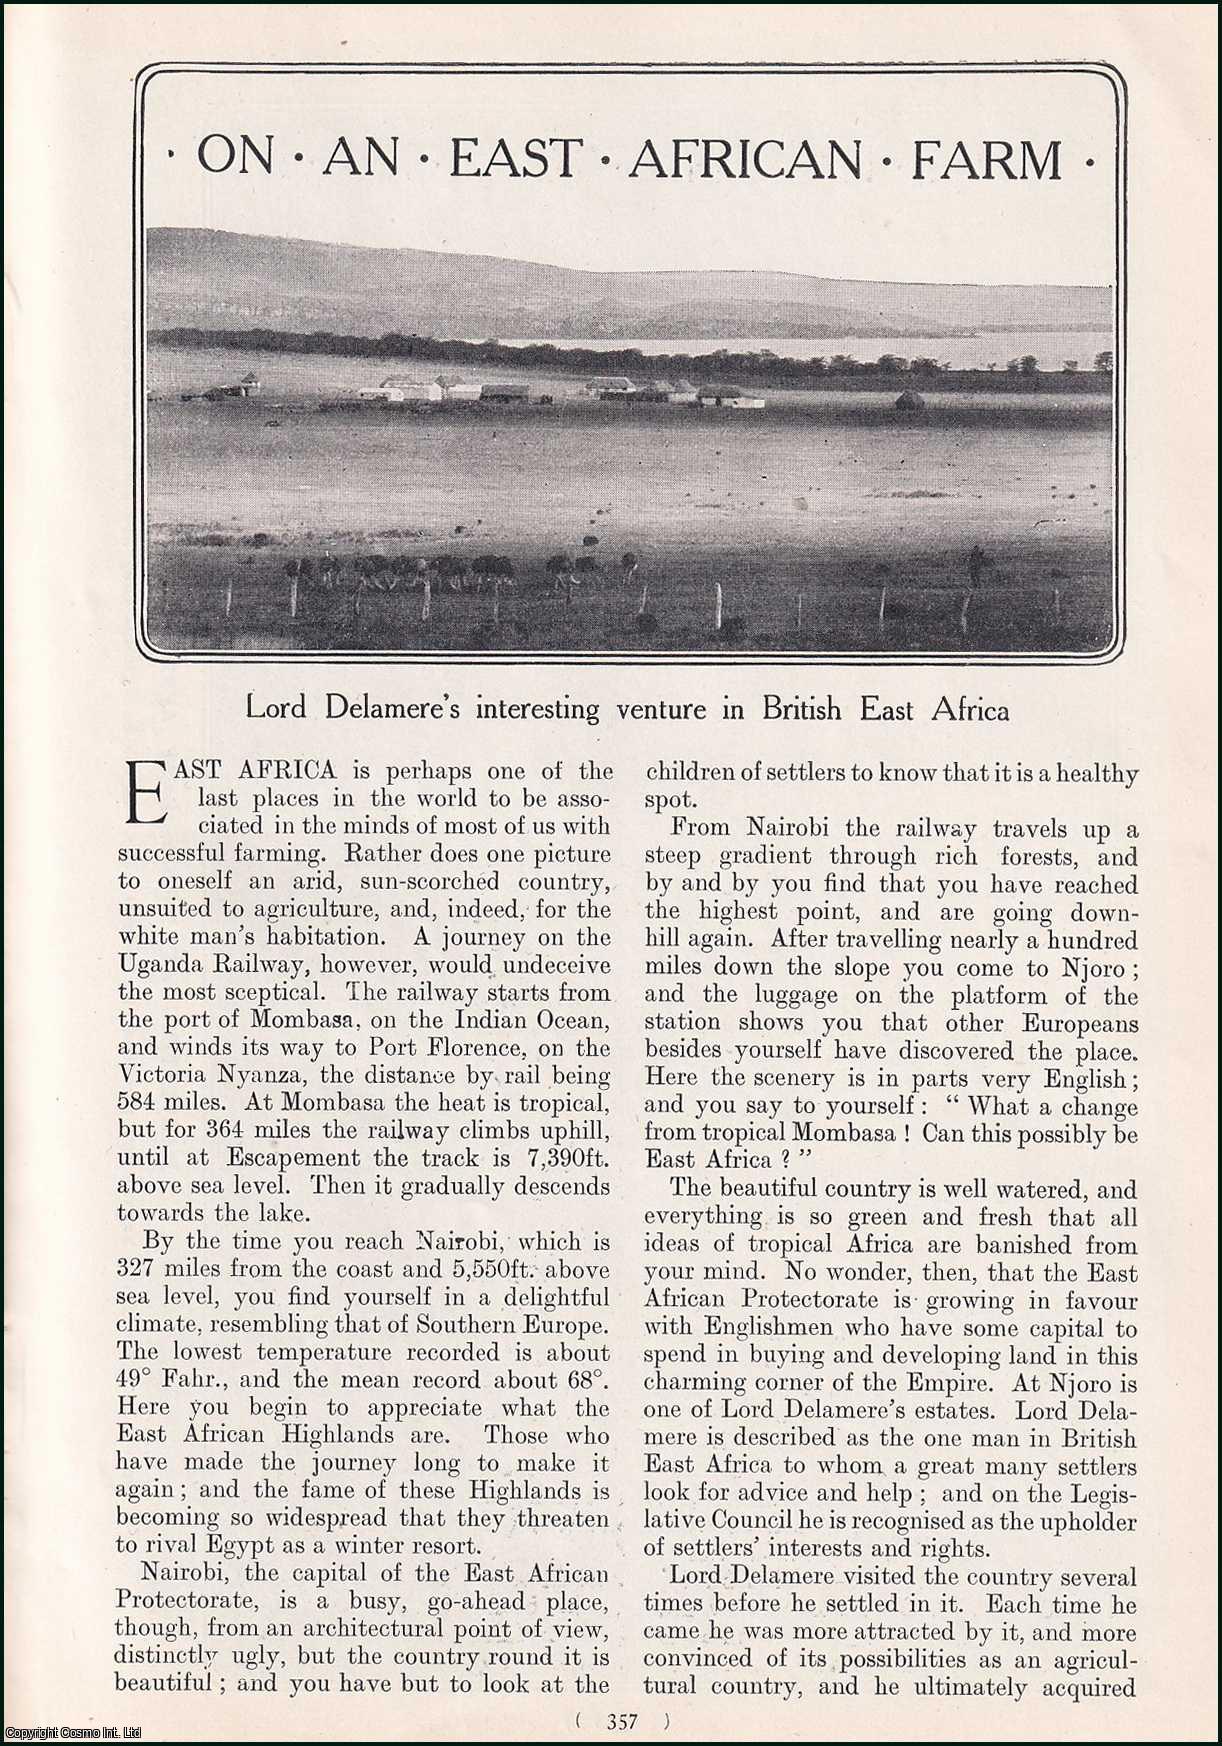 No Author Stated - On an East African Farm, Njoro. An uncommon original article from the Harmsworth London Magazine, 1910.